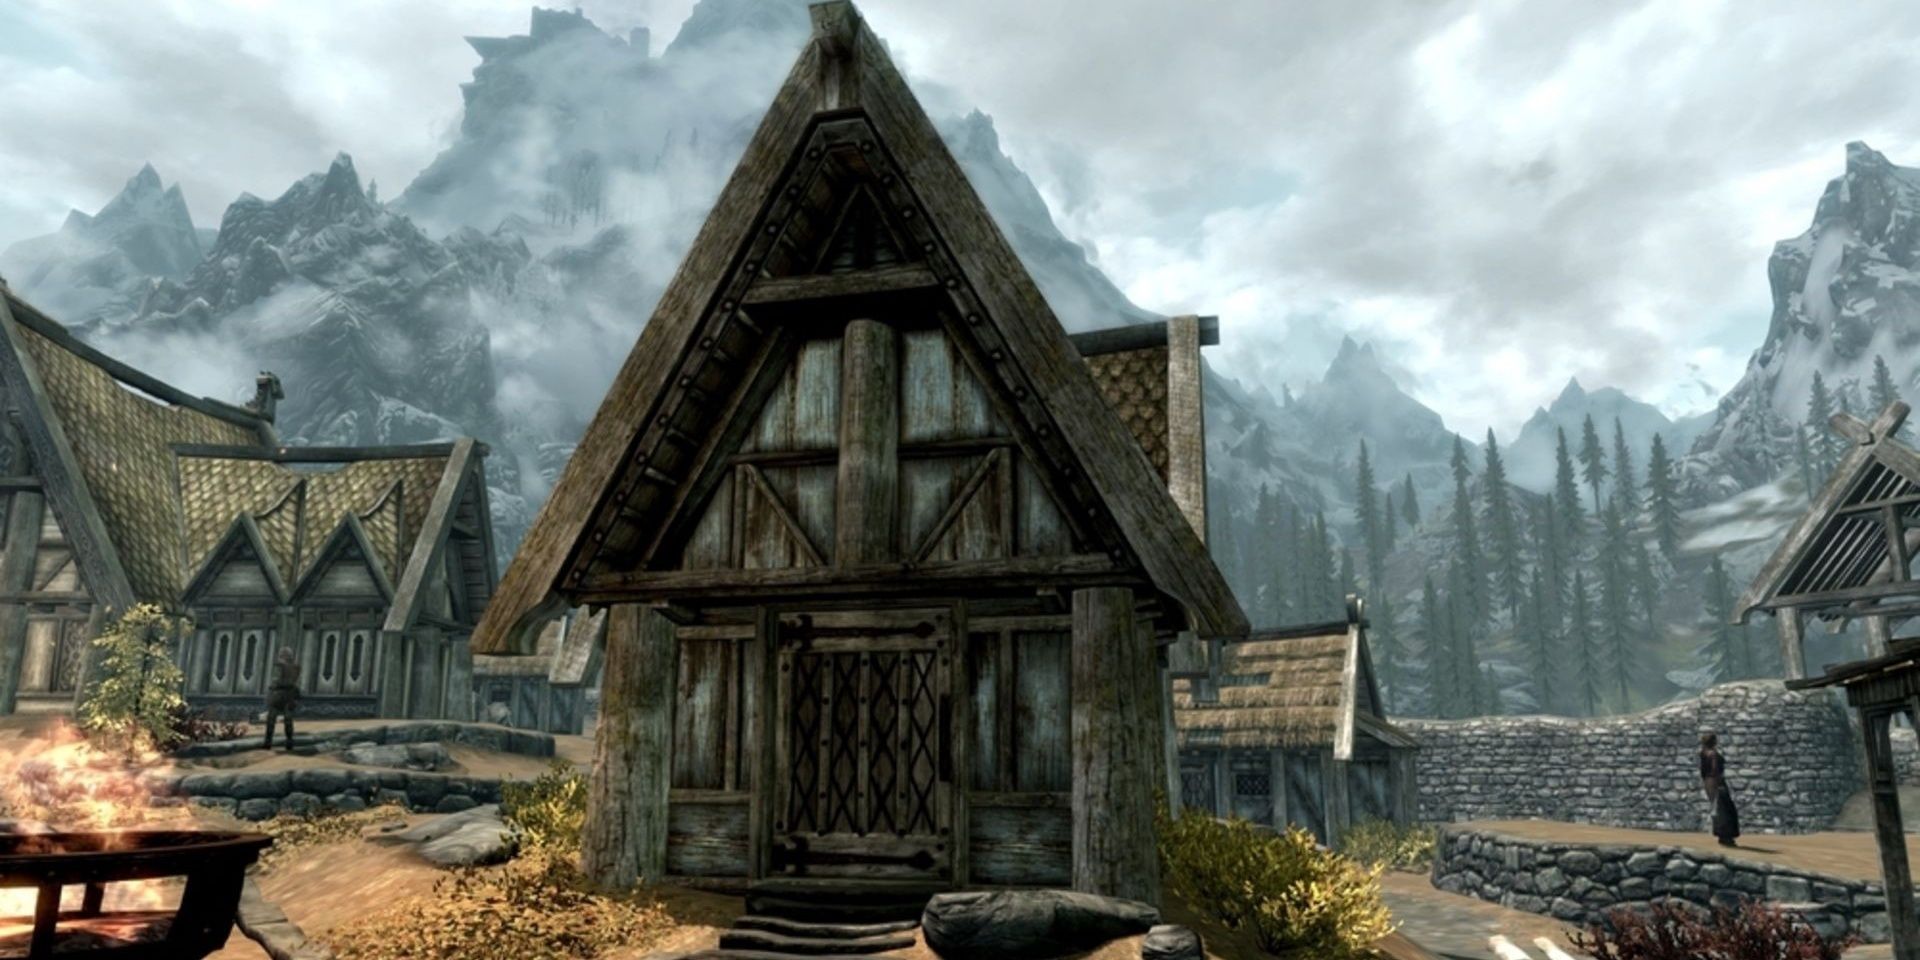 A small skyrim house with mountains in the background